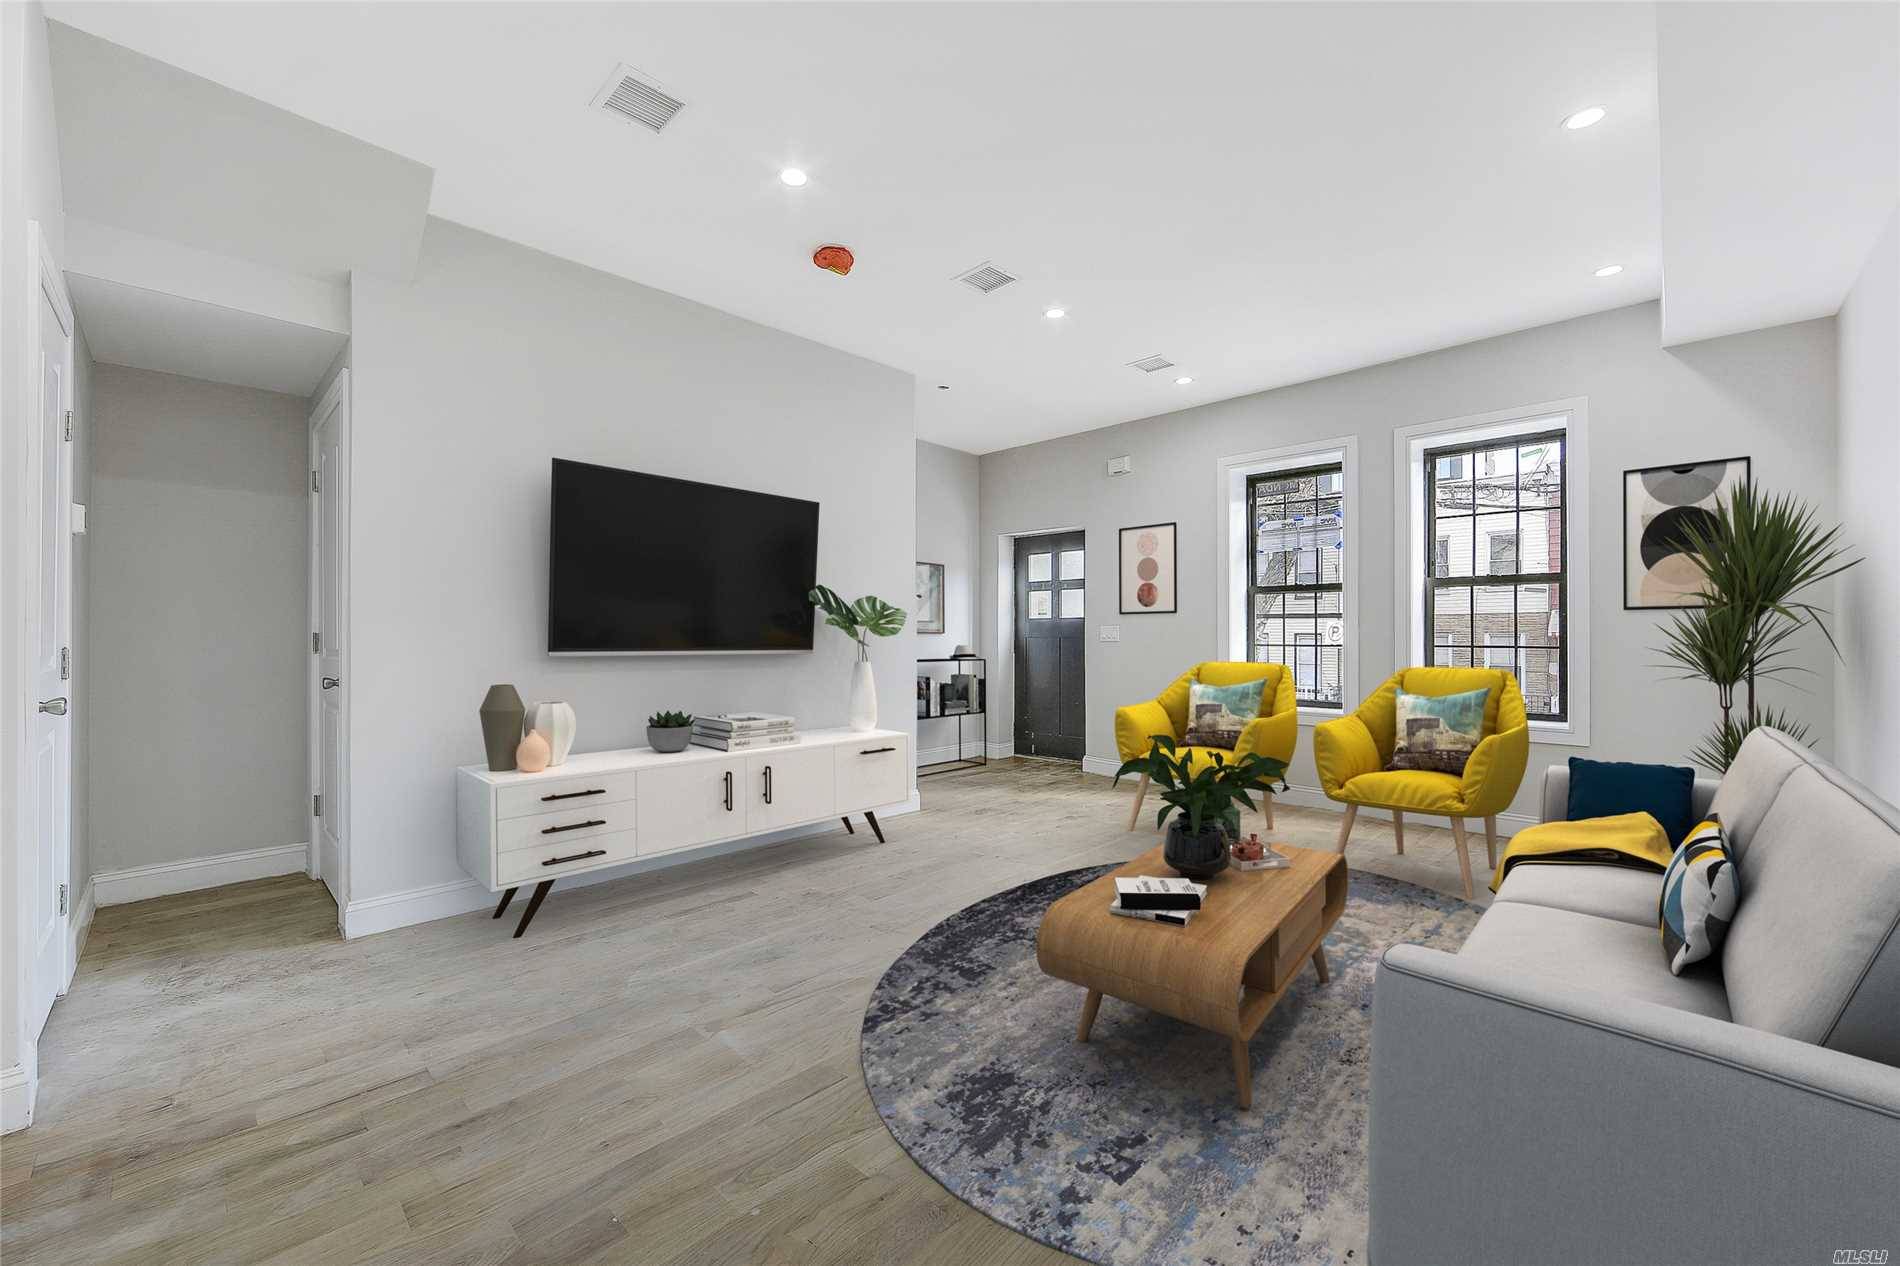 Space, style modern luxury come together in this newly renovated brick townhouse nestled on a beautiful tree lined street of Booming Flatbush.